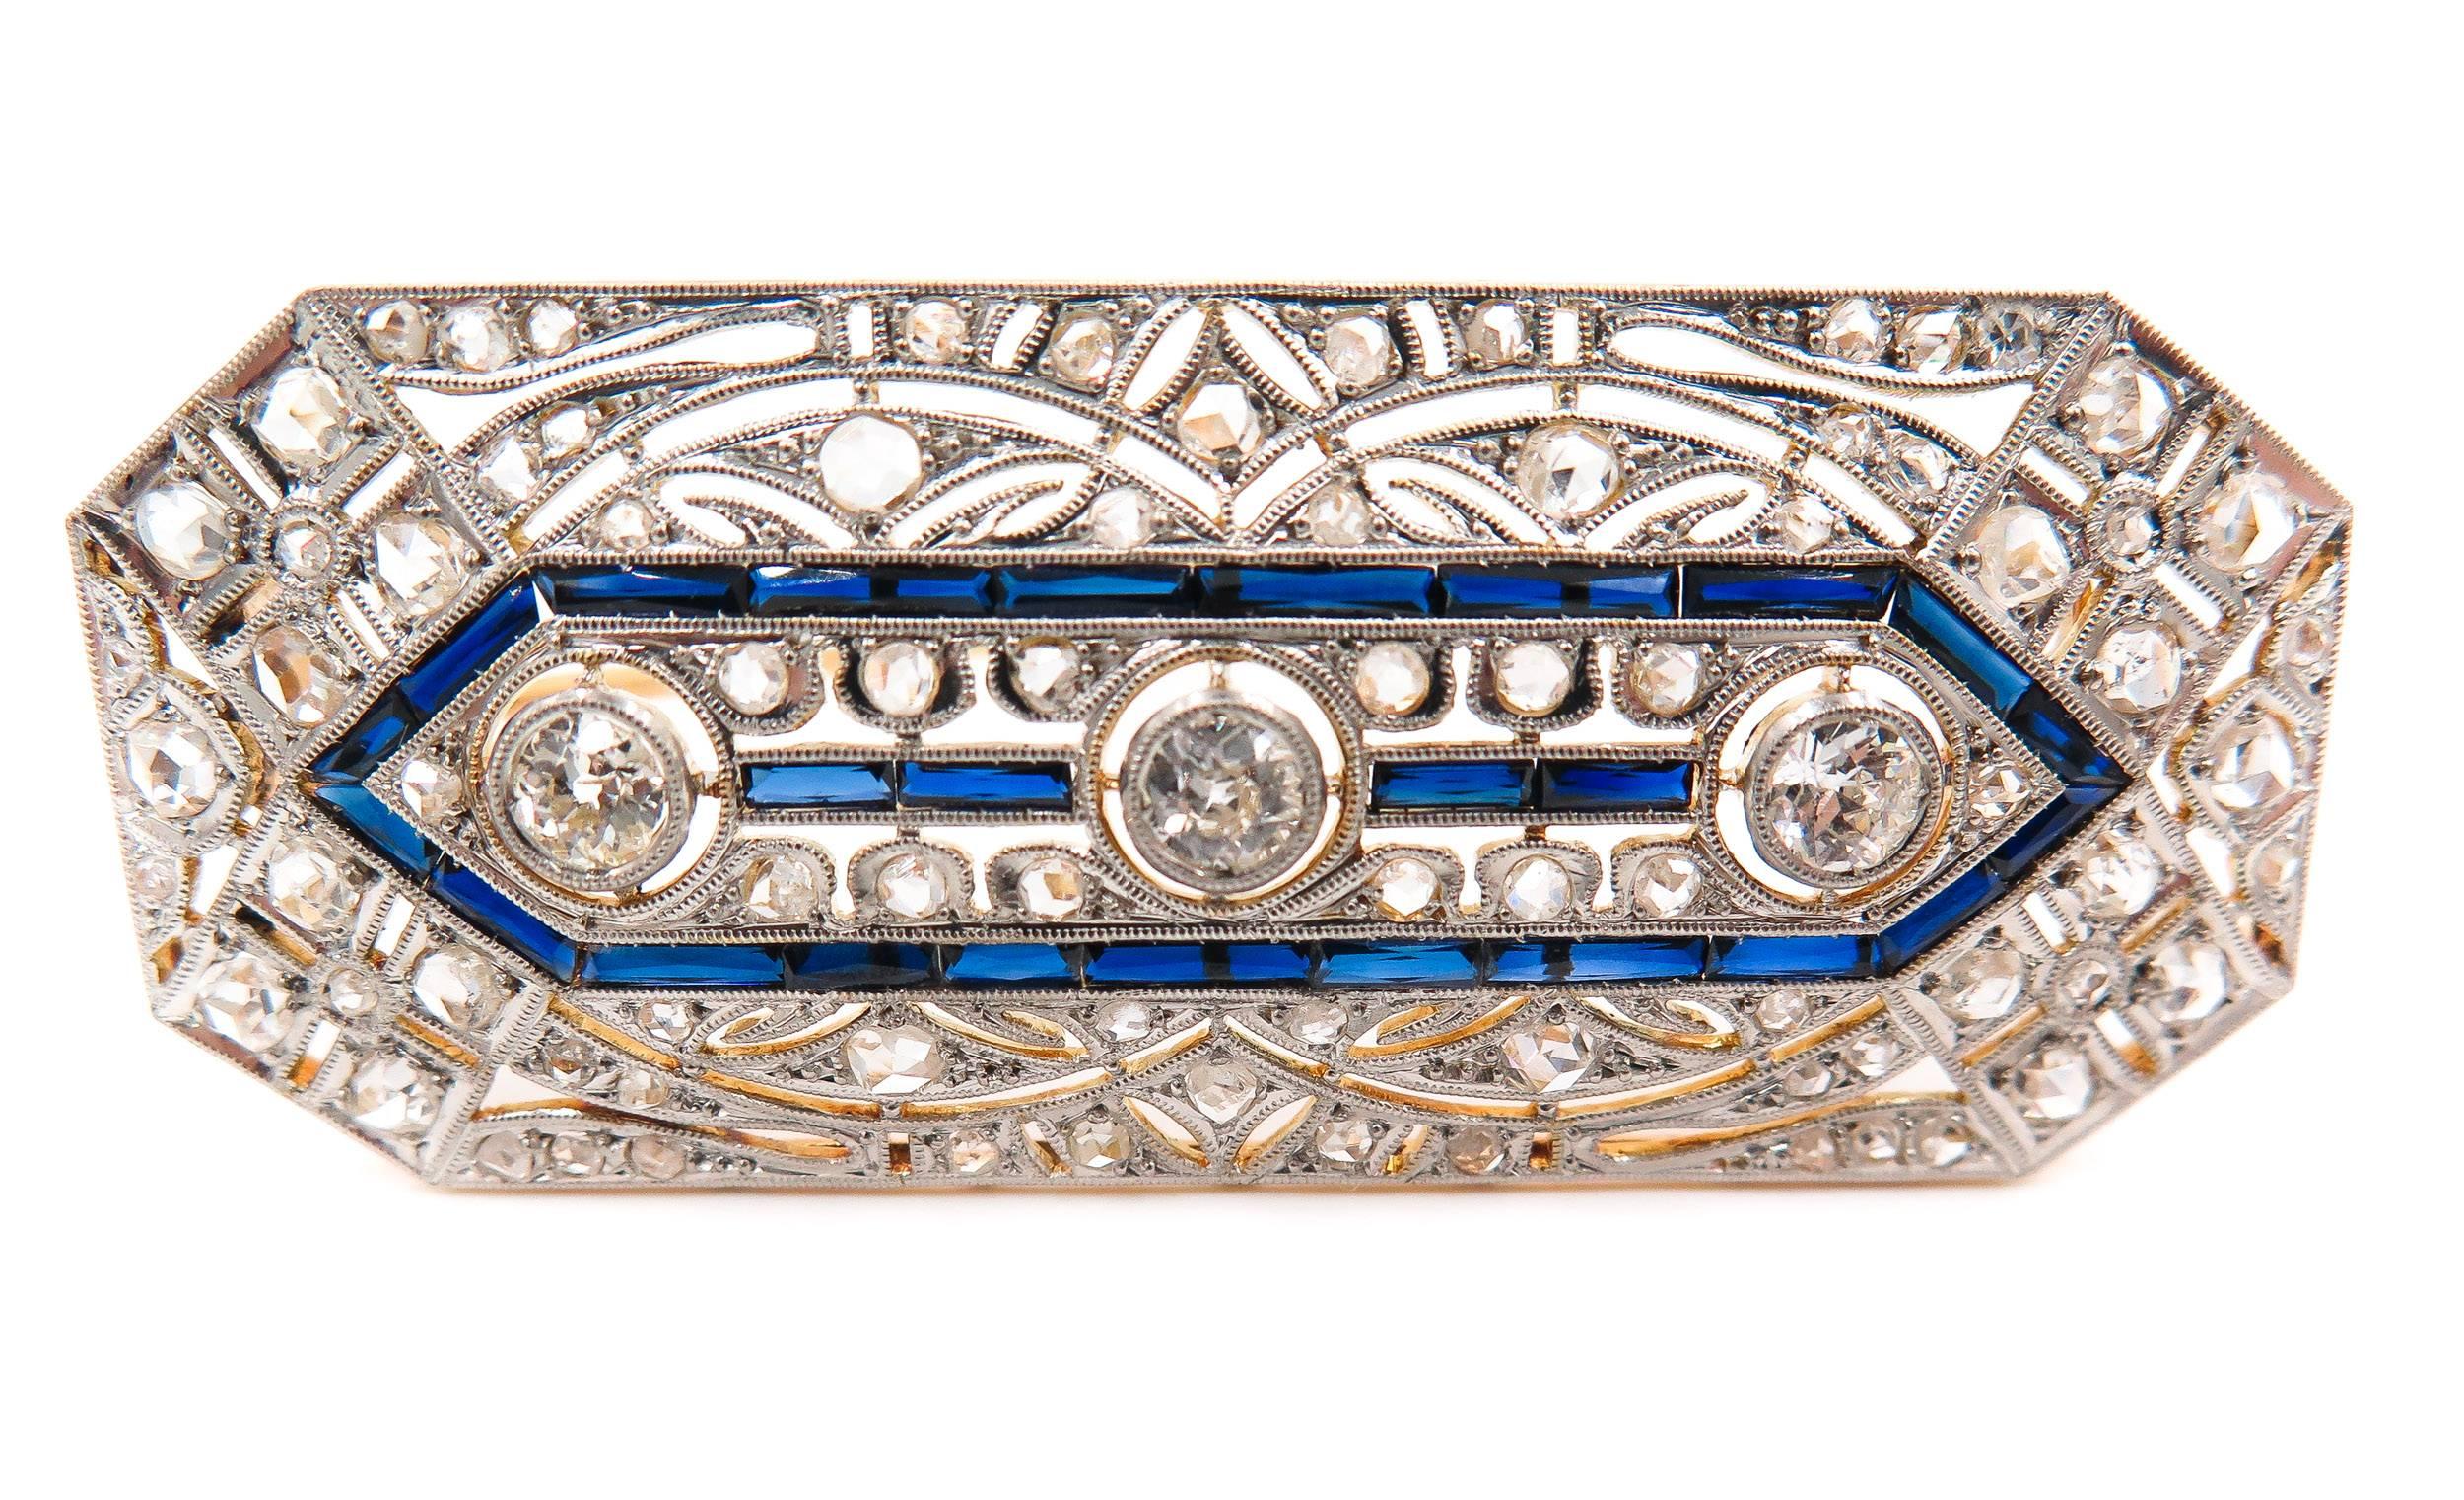 Art Deco diamond and sapphire crafted in platinum and 18K yellow gold brooch. 
Designed with 3 rose-cut diamonds framed by similarly cut diamonds and blue sapphire, an excellent quality jewel, high craftsmanship and outstanding beauty, characterized